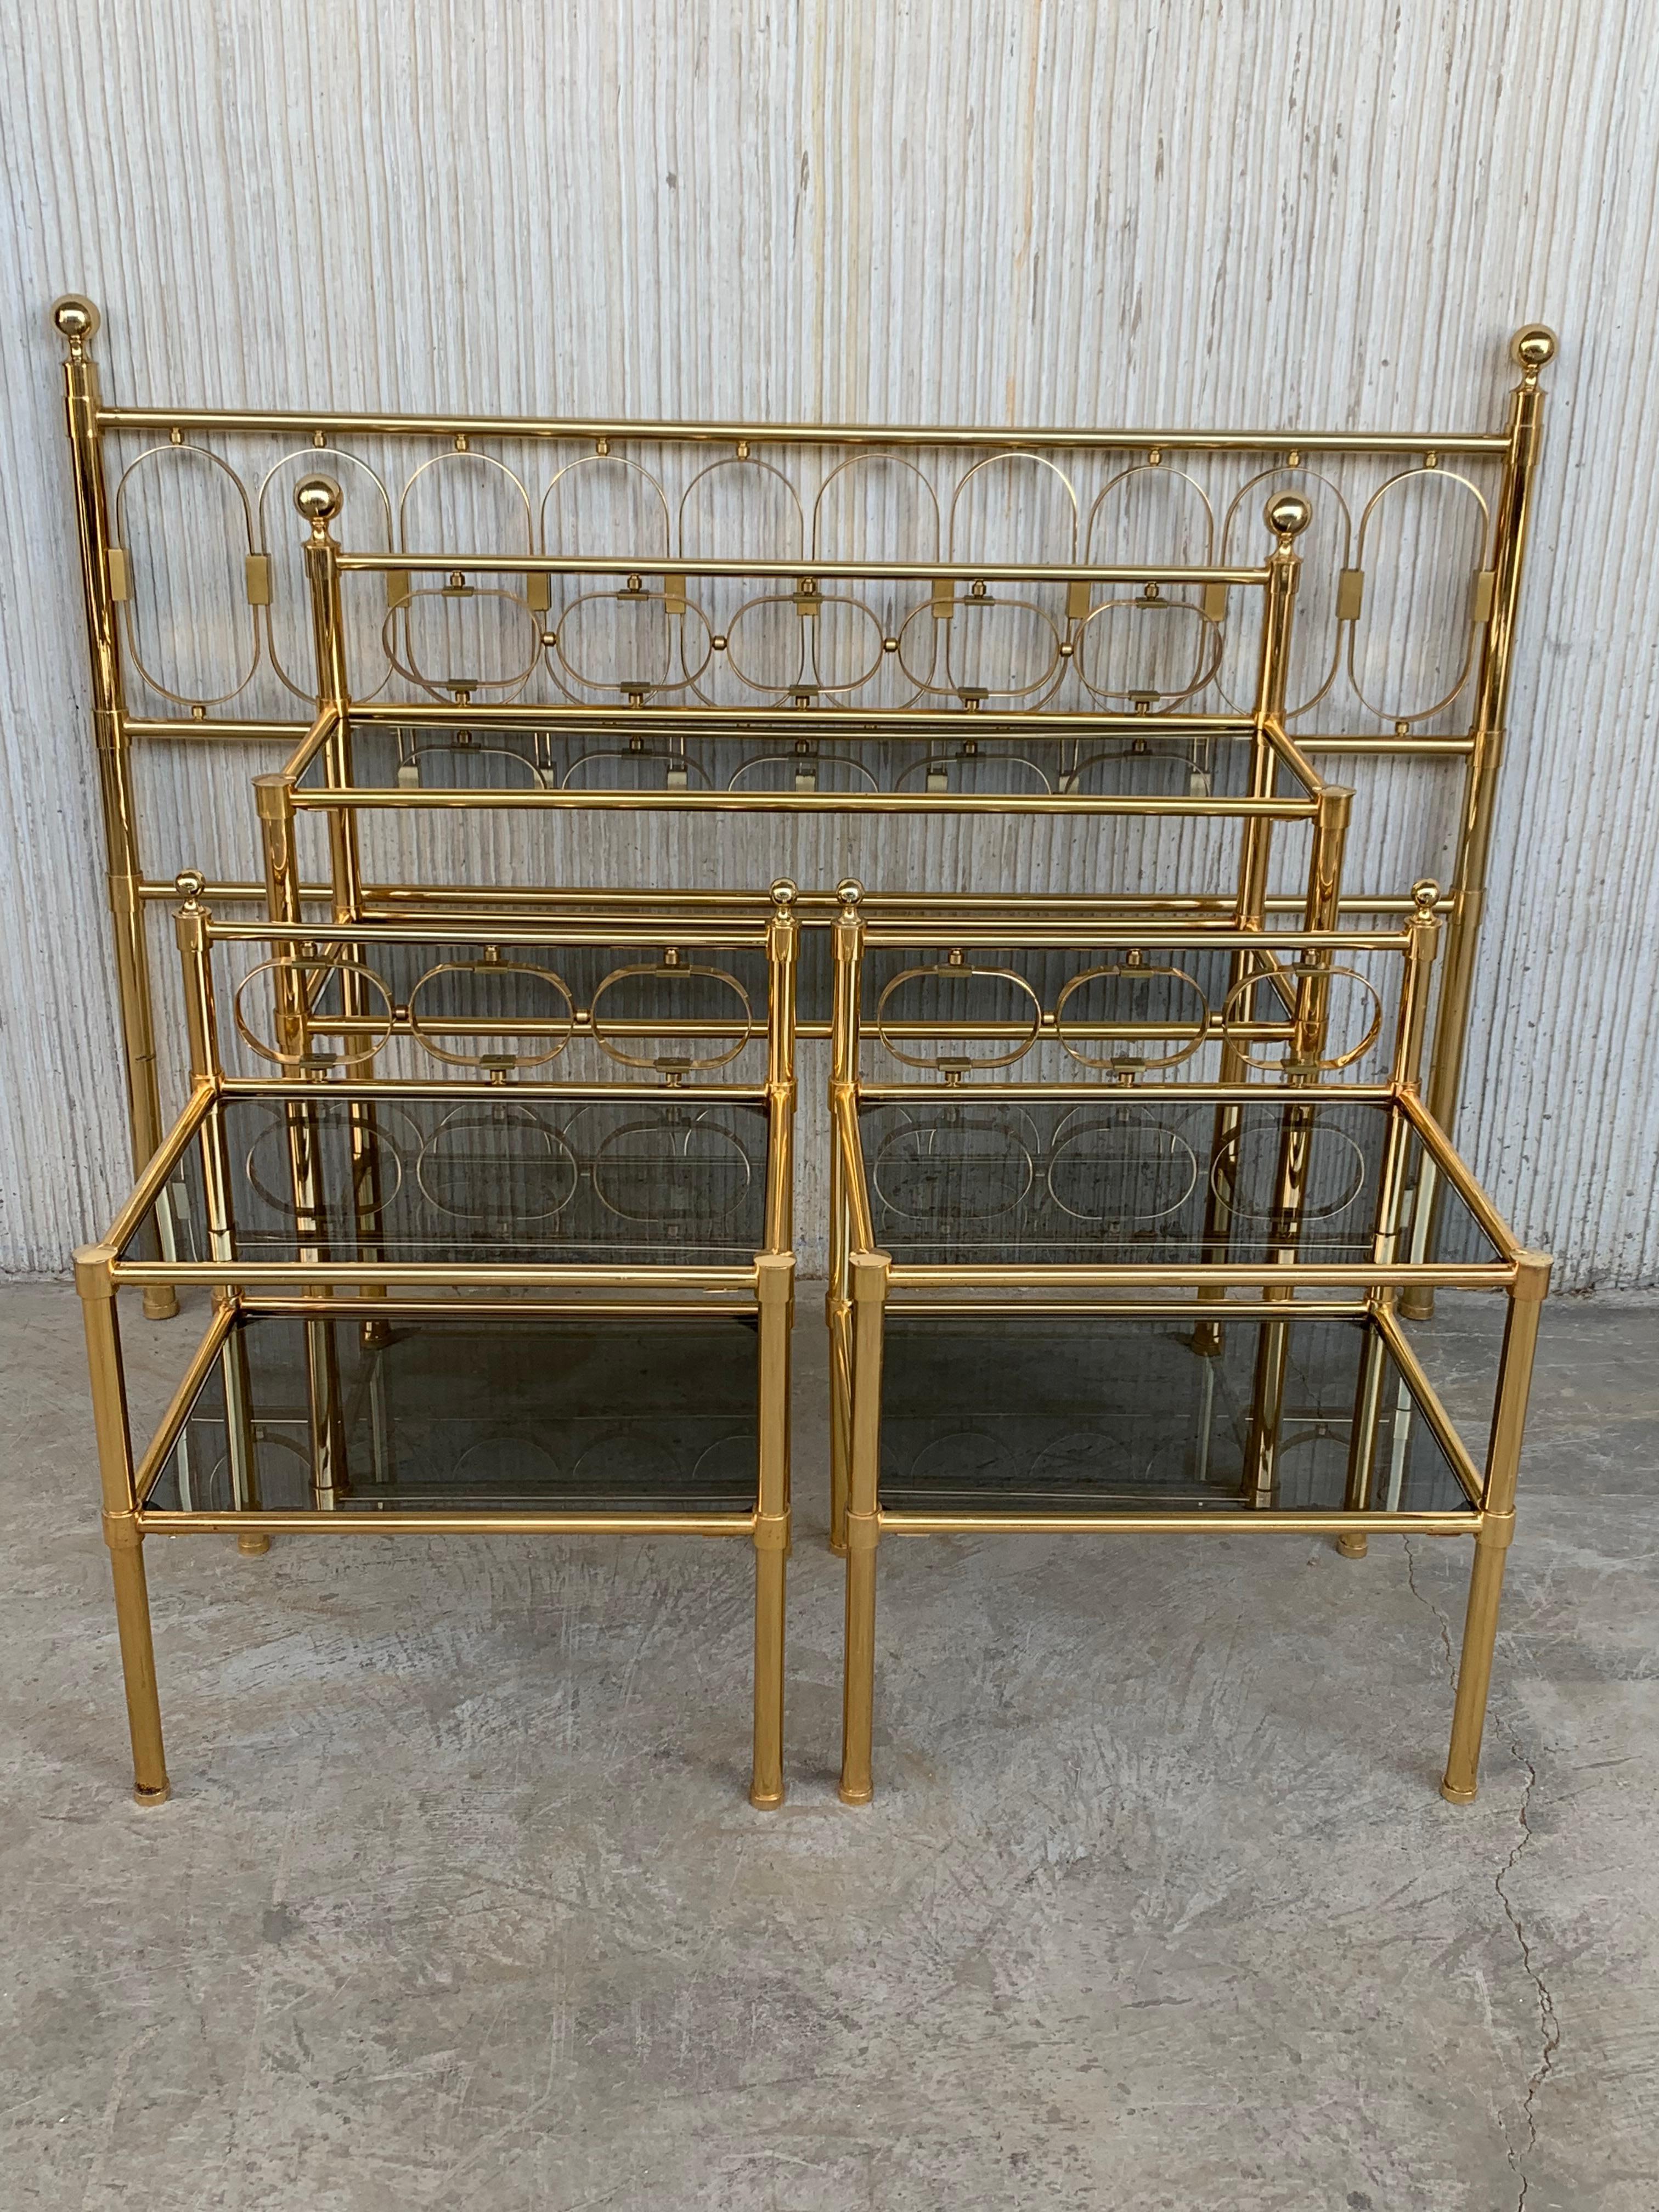 Mid Century Modern Full Brass Headboard Featuring Gometrical FIgures In Good Condition For Sale In Miami, FL